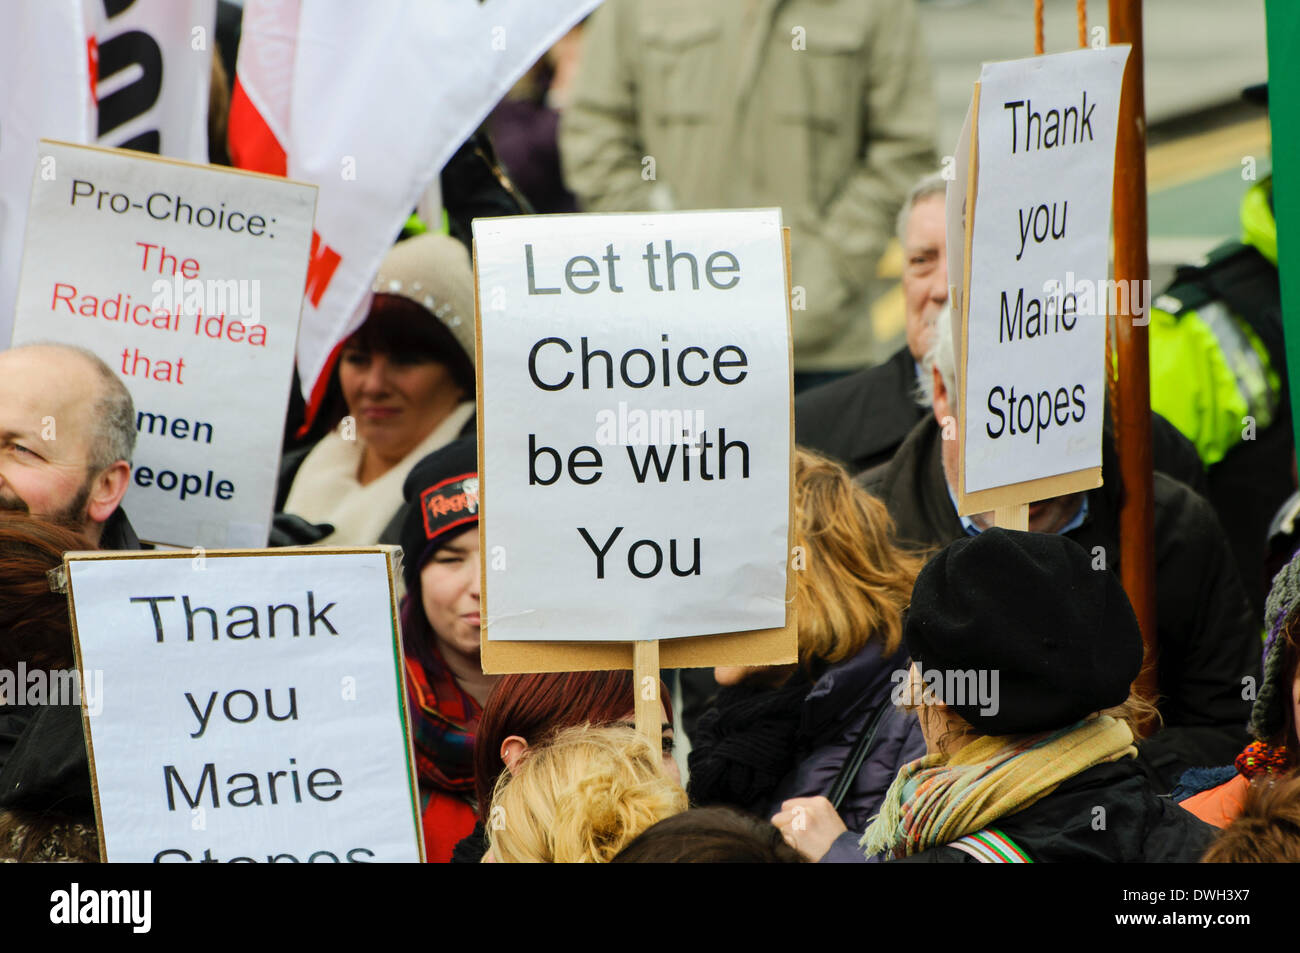 Belfast, Northern Ireland. 8 Mar 2014 - Women hold posters saying 'Thank you Marie Stopes' and 'Let the Choice be with You' by pro-life abortion campaigners at the International Women's Day celebration Credit:  Stephen Barnes/Alamy Live News Stock Photo